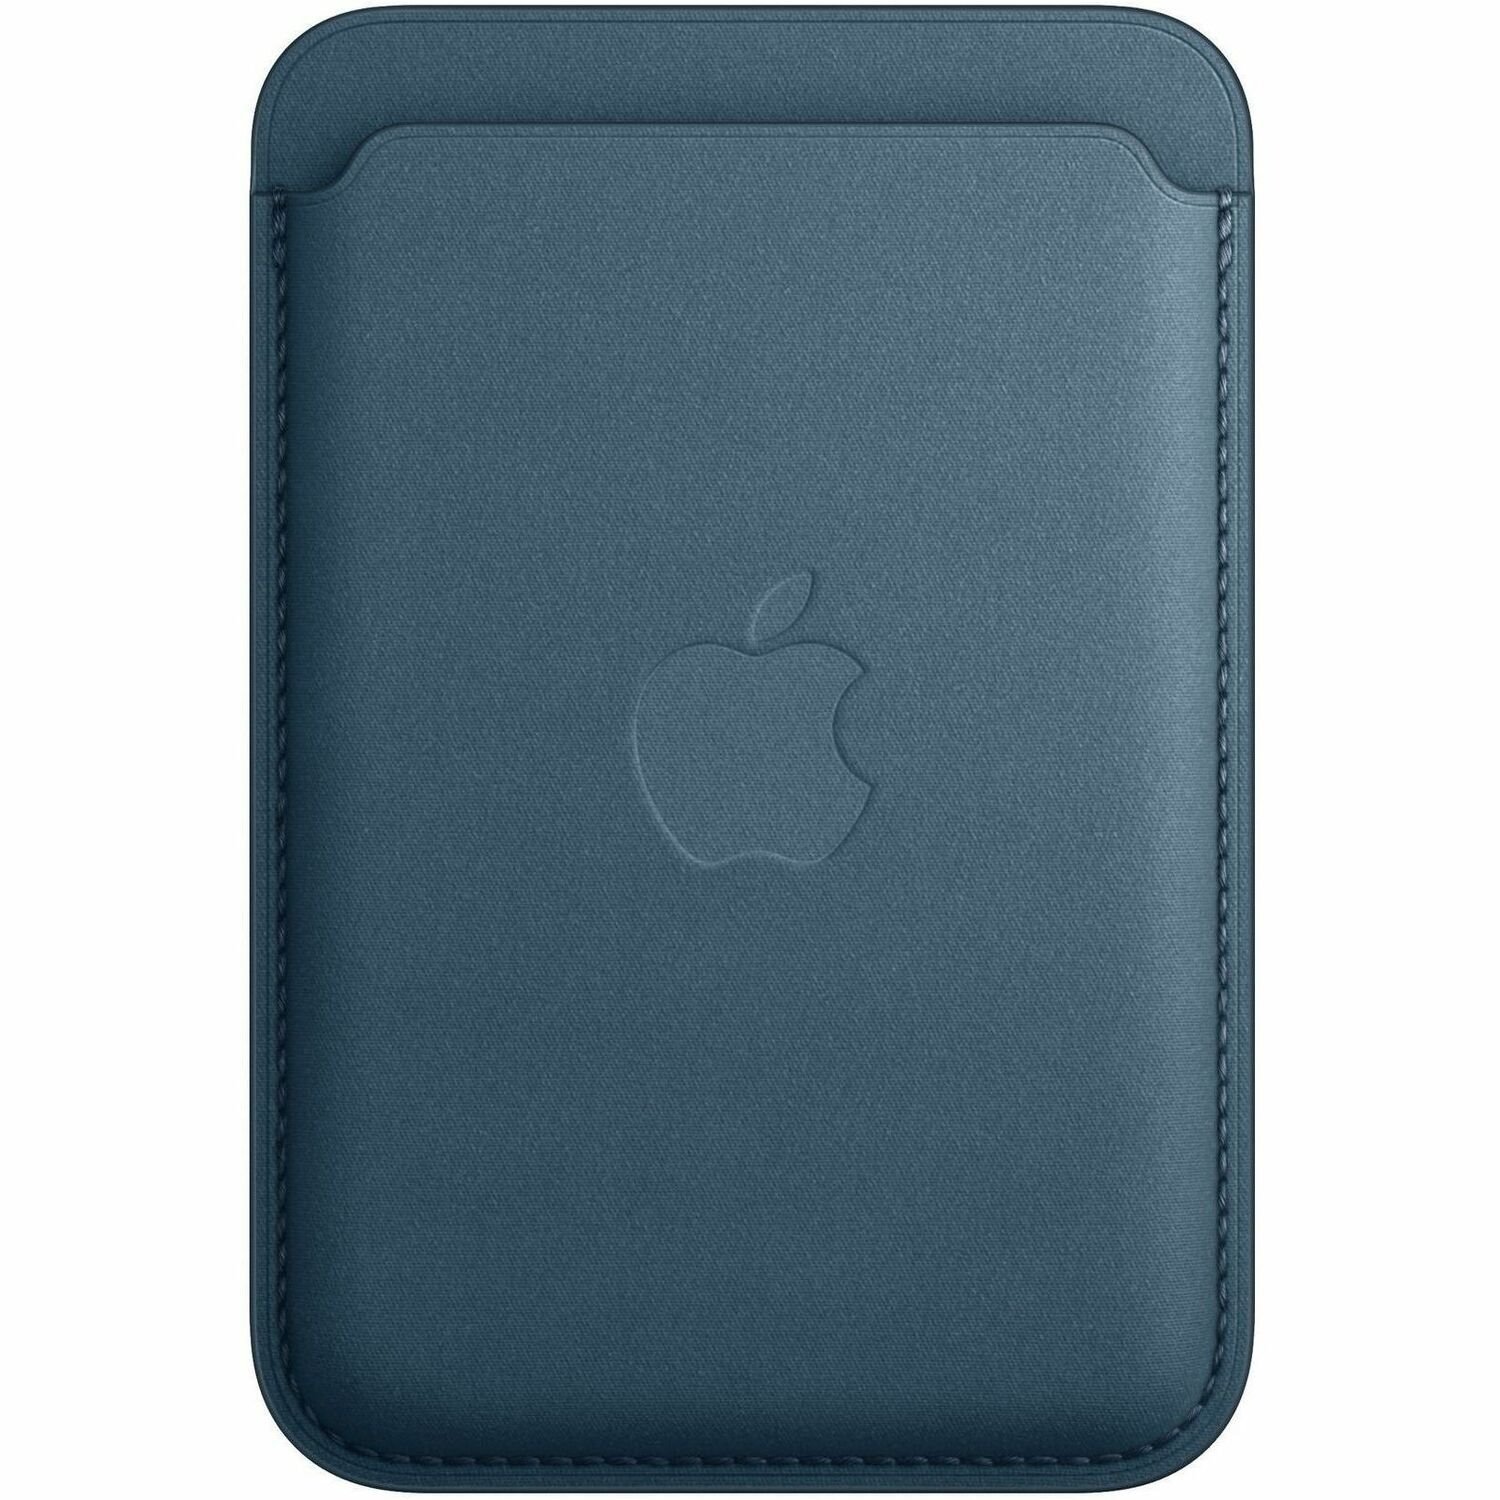 Apple Carrying Case (Wallet) Apple iPhone 15 Pro, iPhone 15 Pro Max, iPhone 15, iPhone 15 Plus, iPhone 14 Pro Max, iPhone 14 Pro, iPhone 14, iPhone 14 Plus, iPhone 13 Pro, iPhone 13 Pro Max, iPhone 13 mini, ... Smartphone, ID Card, Credit Card - Pacific Blue